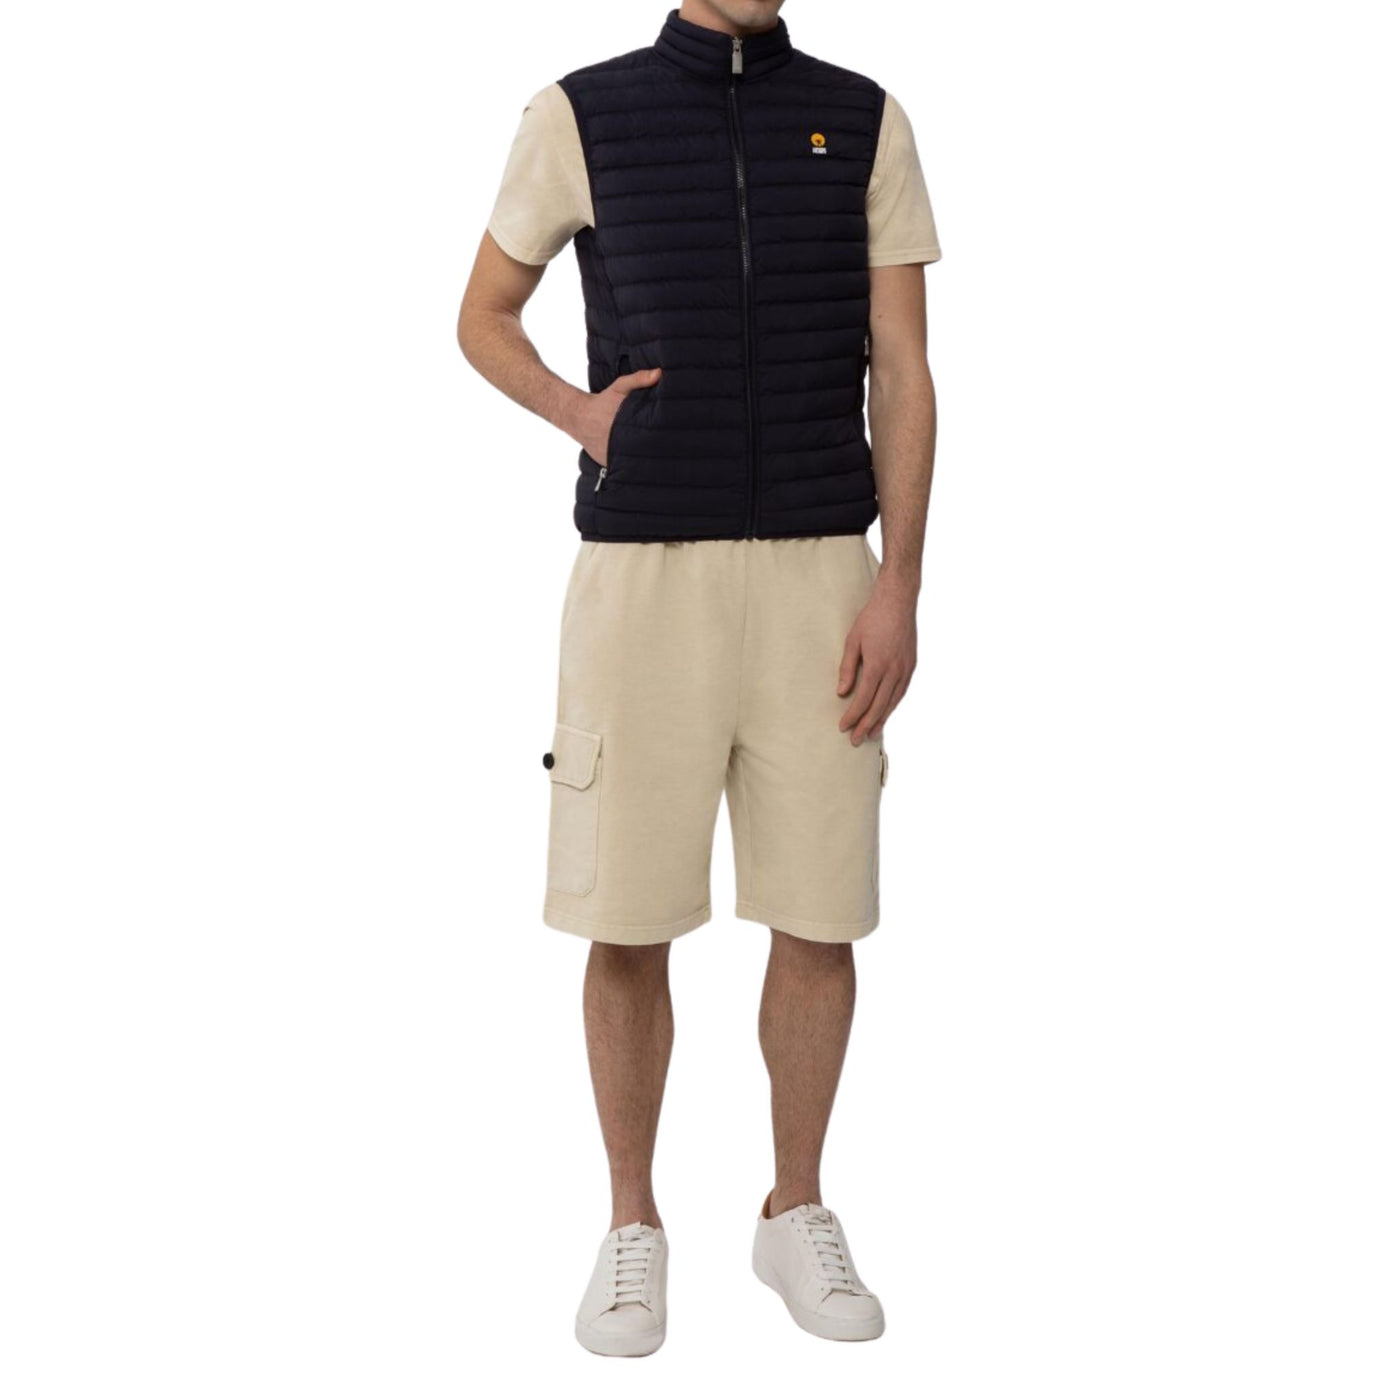 Men's vest padded with real down